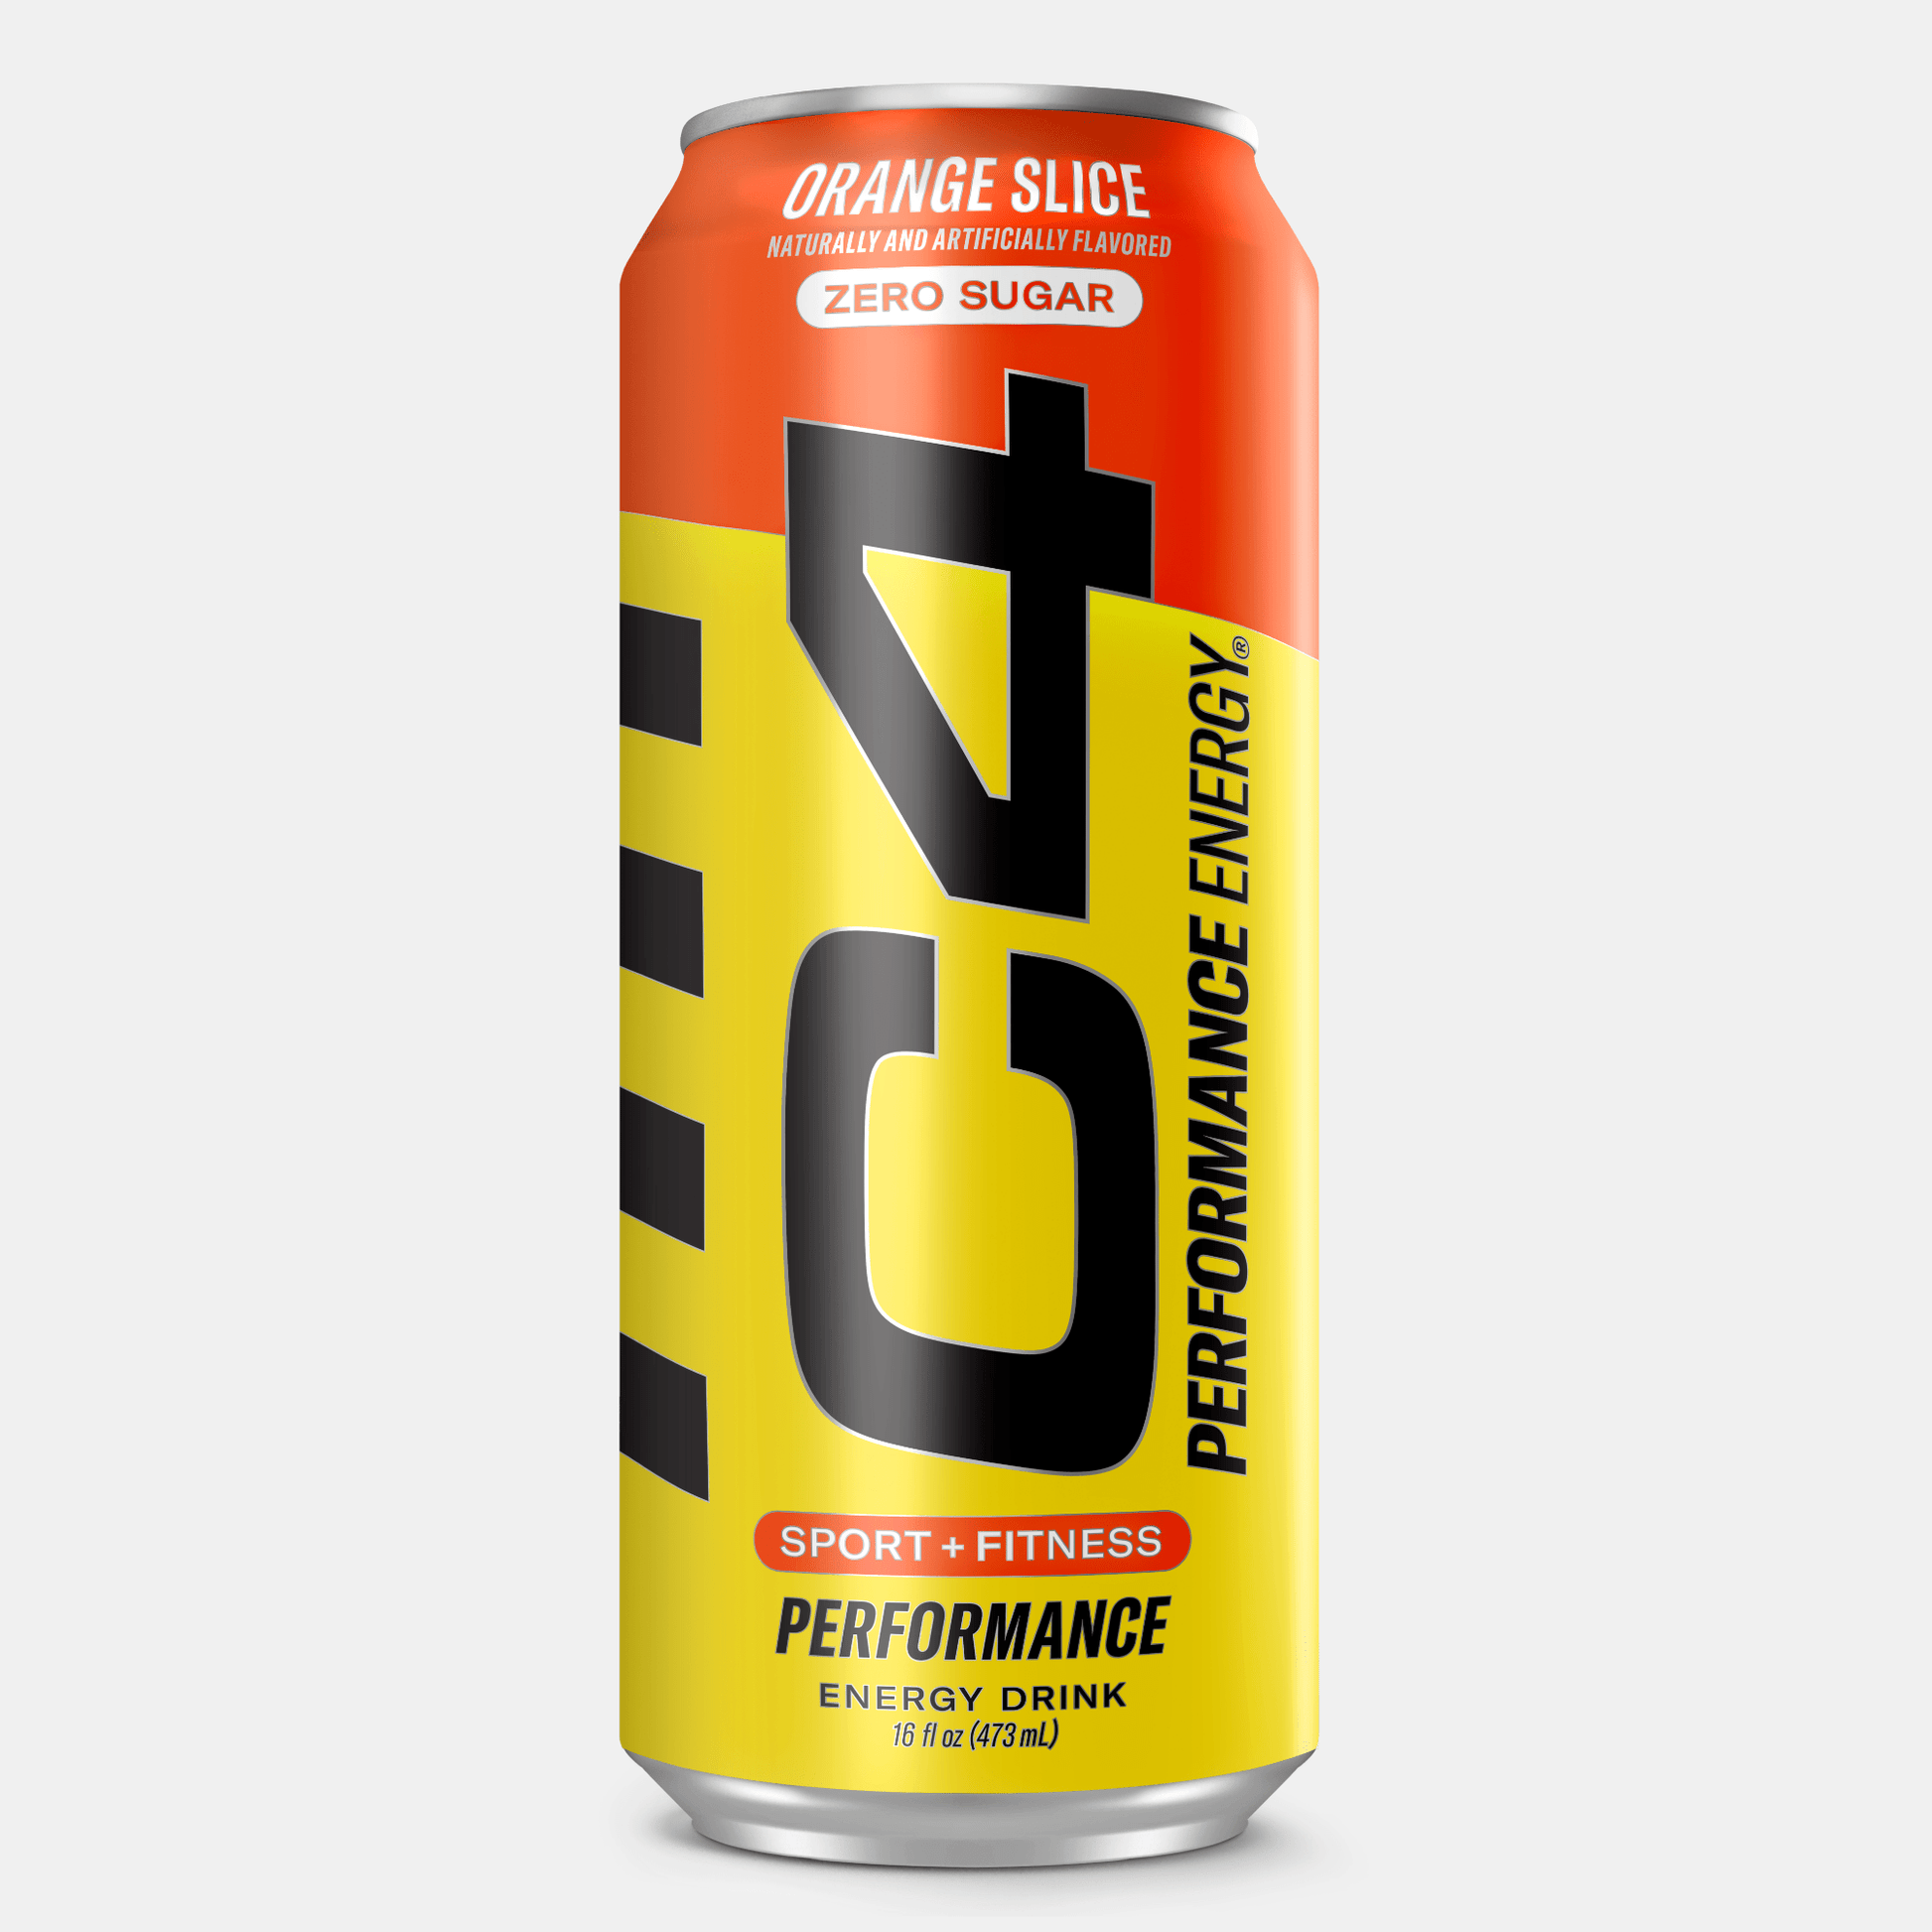 C4 Performance Energy® Carbonated View 1